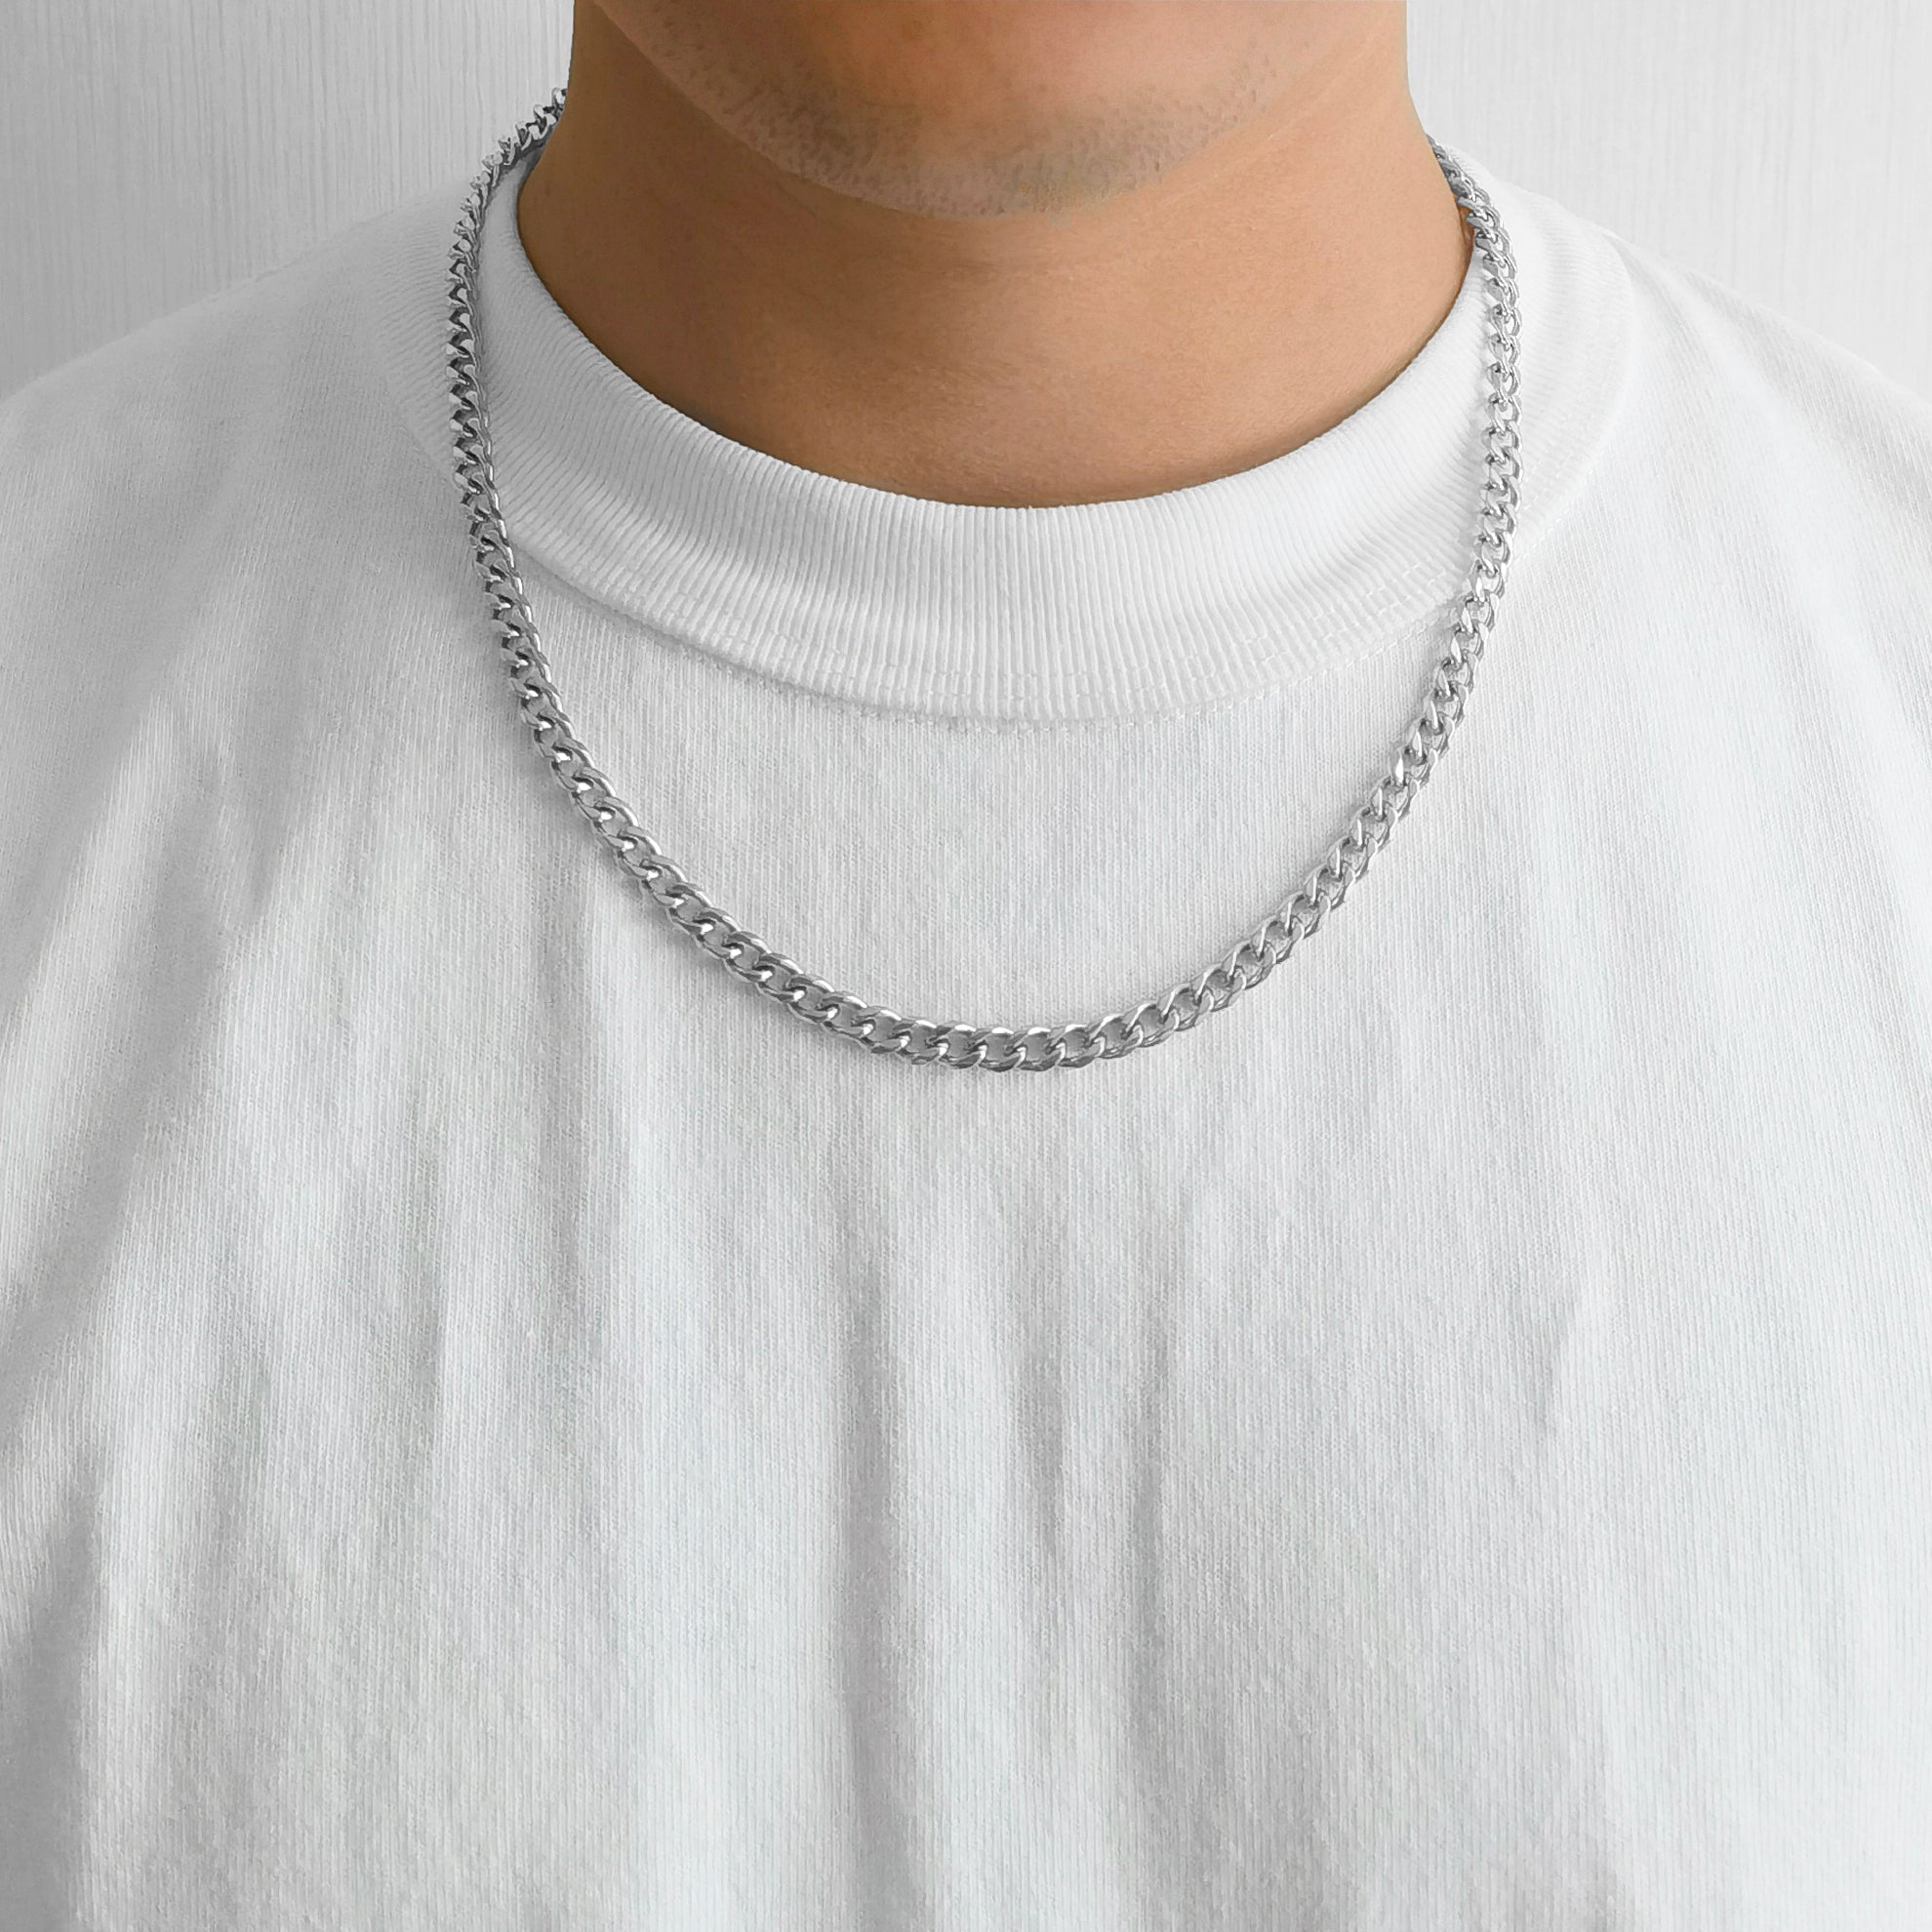 Men's 6mm Stainless Steel 18-24 Inch Curb Chain Necklace